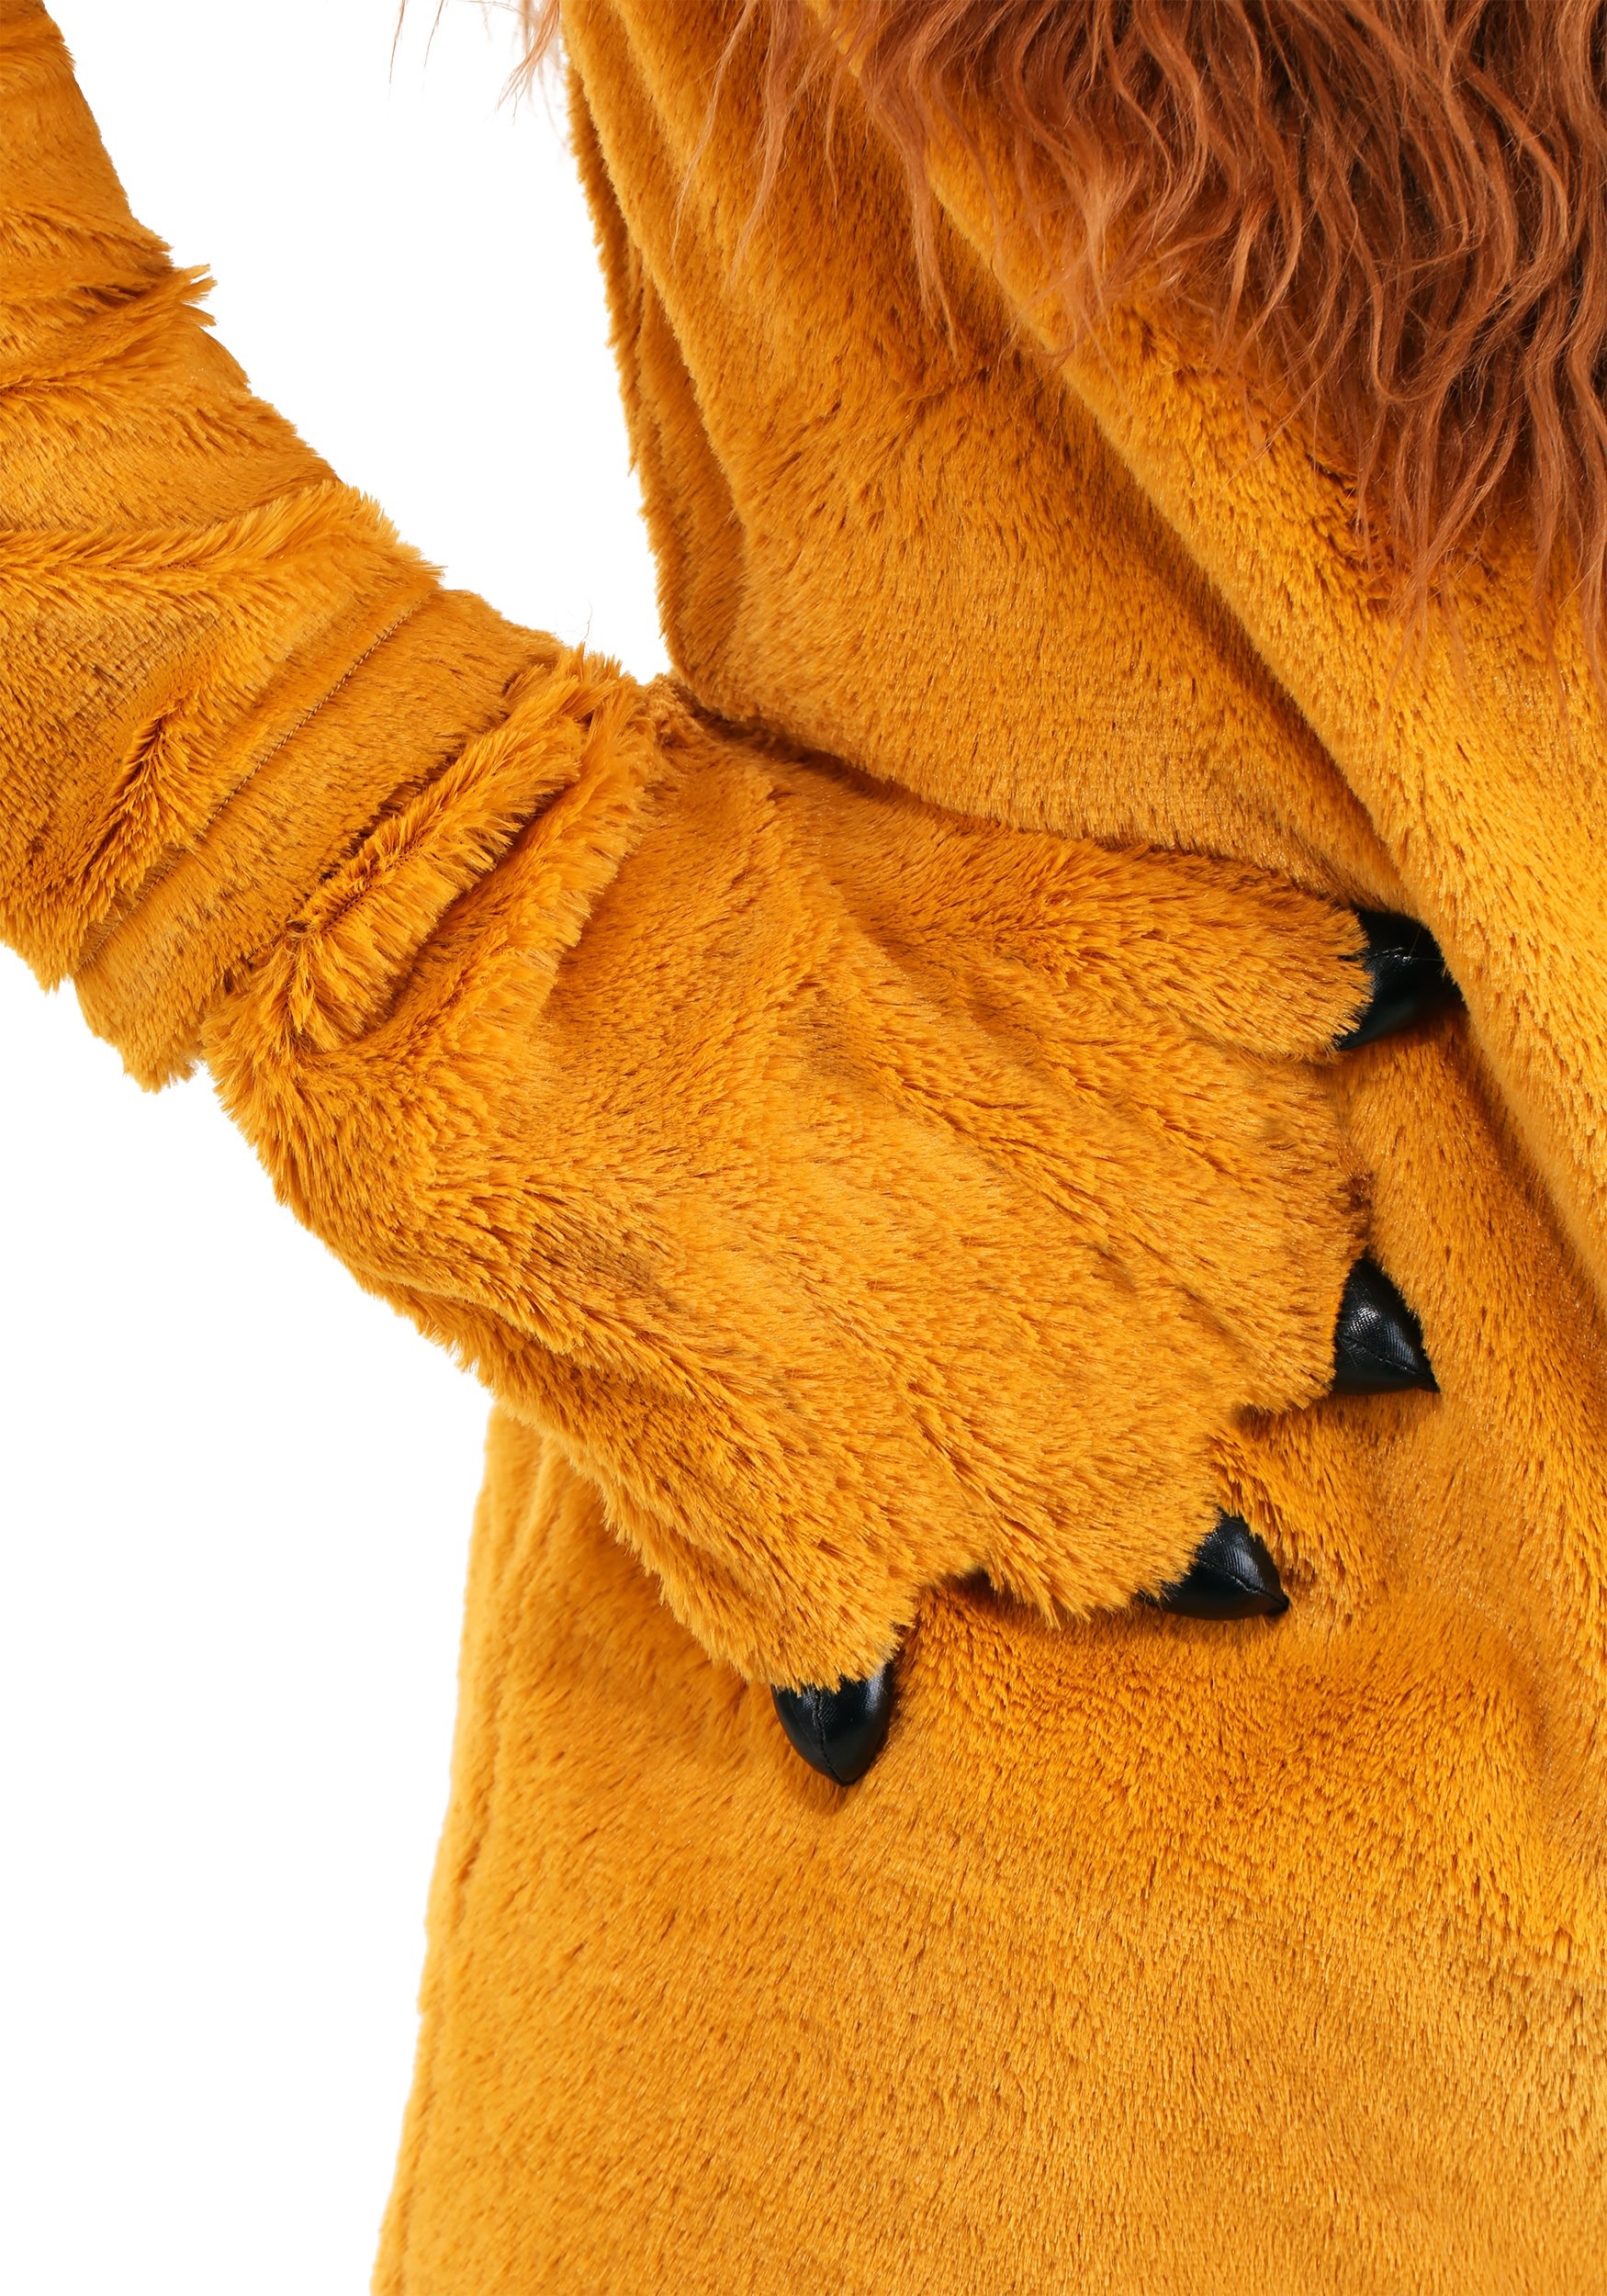 Adult Classic Storybook Lion Costume